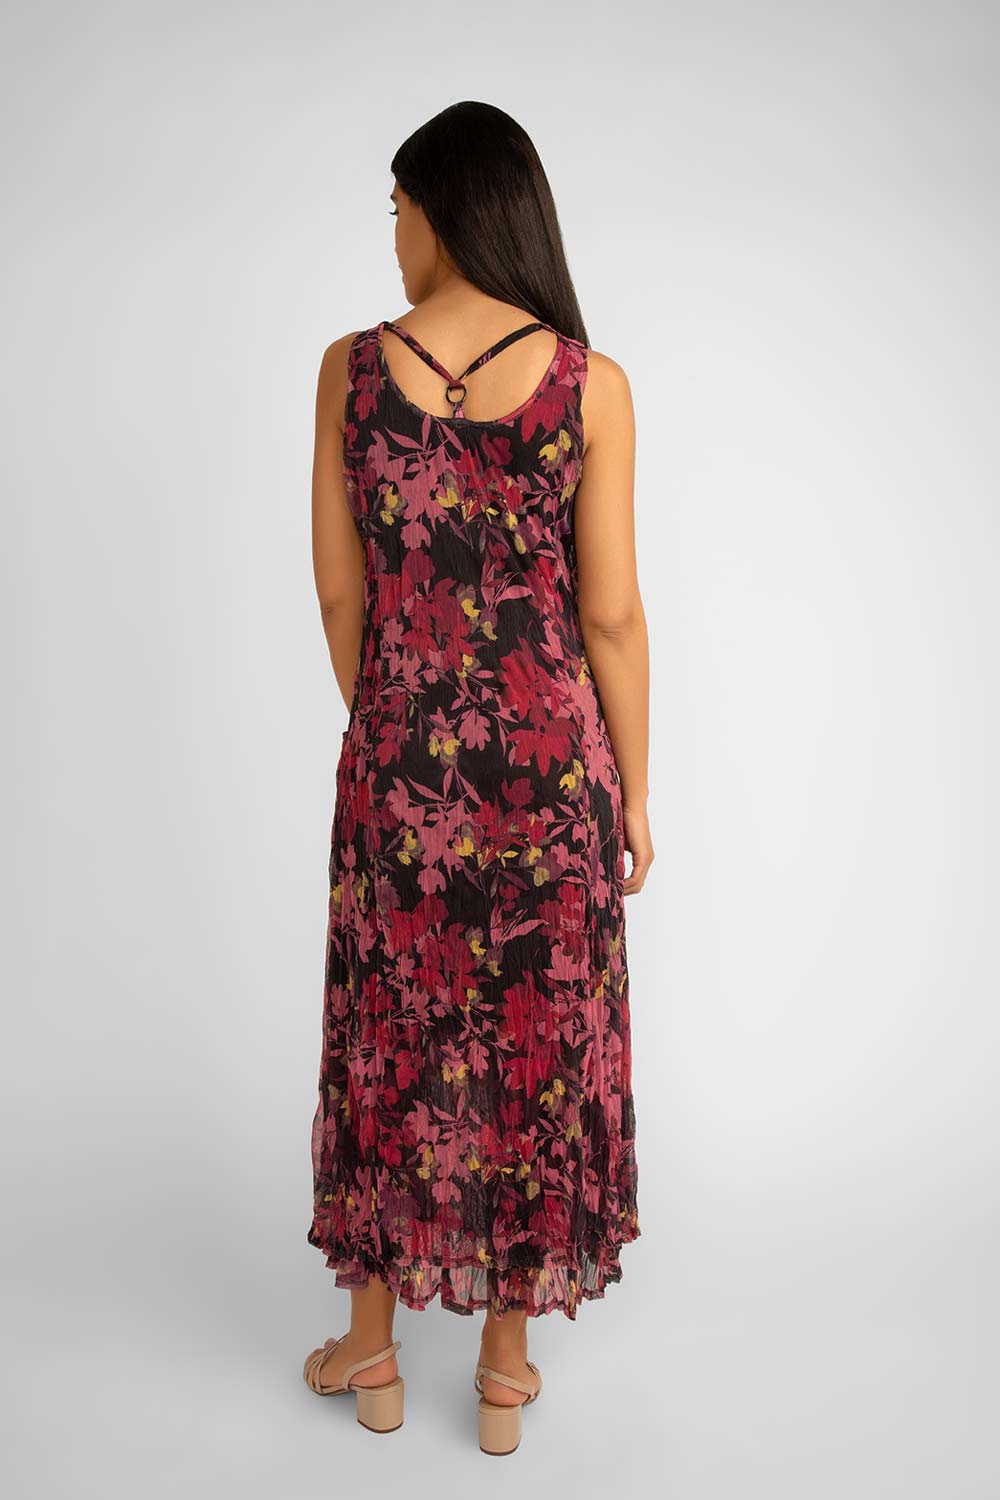 Back view showing strap detail on back on Picadily (jn606lz)Women's Sleeveless Scoop Neck Pink Floral Crinkle Mesh Maxi Dress with Pockets